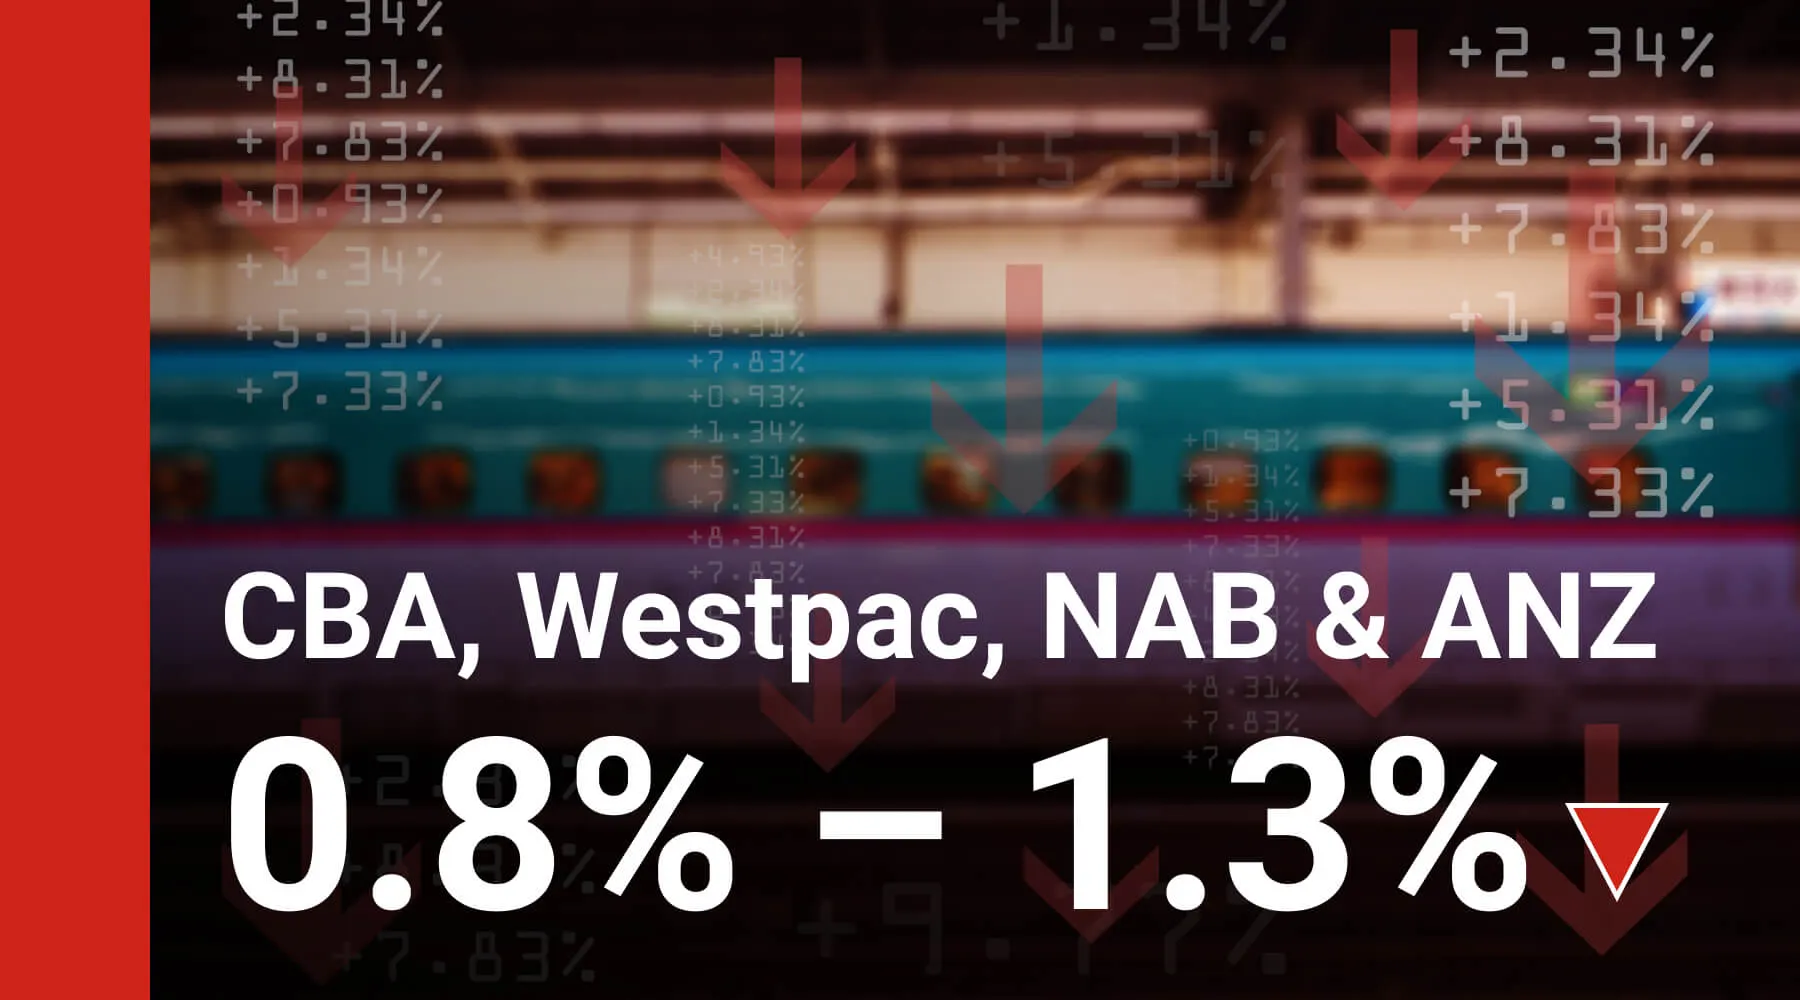 Why are the CBA and WBC share prices stumbling today?